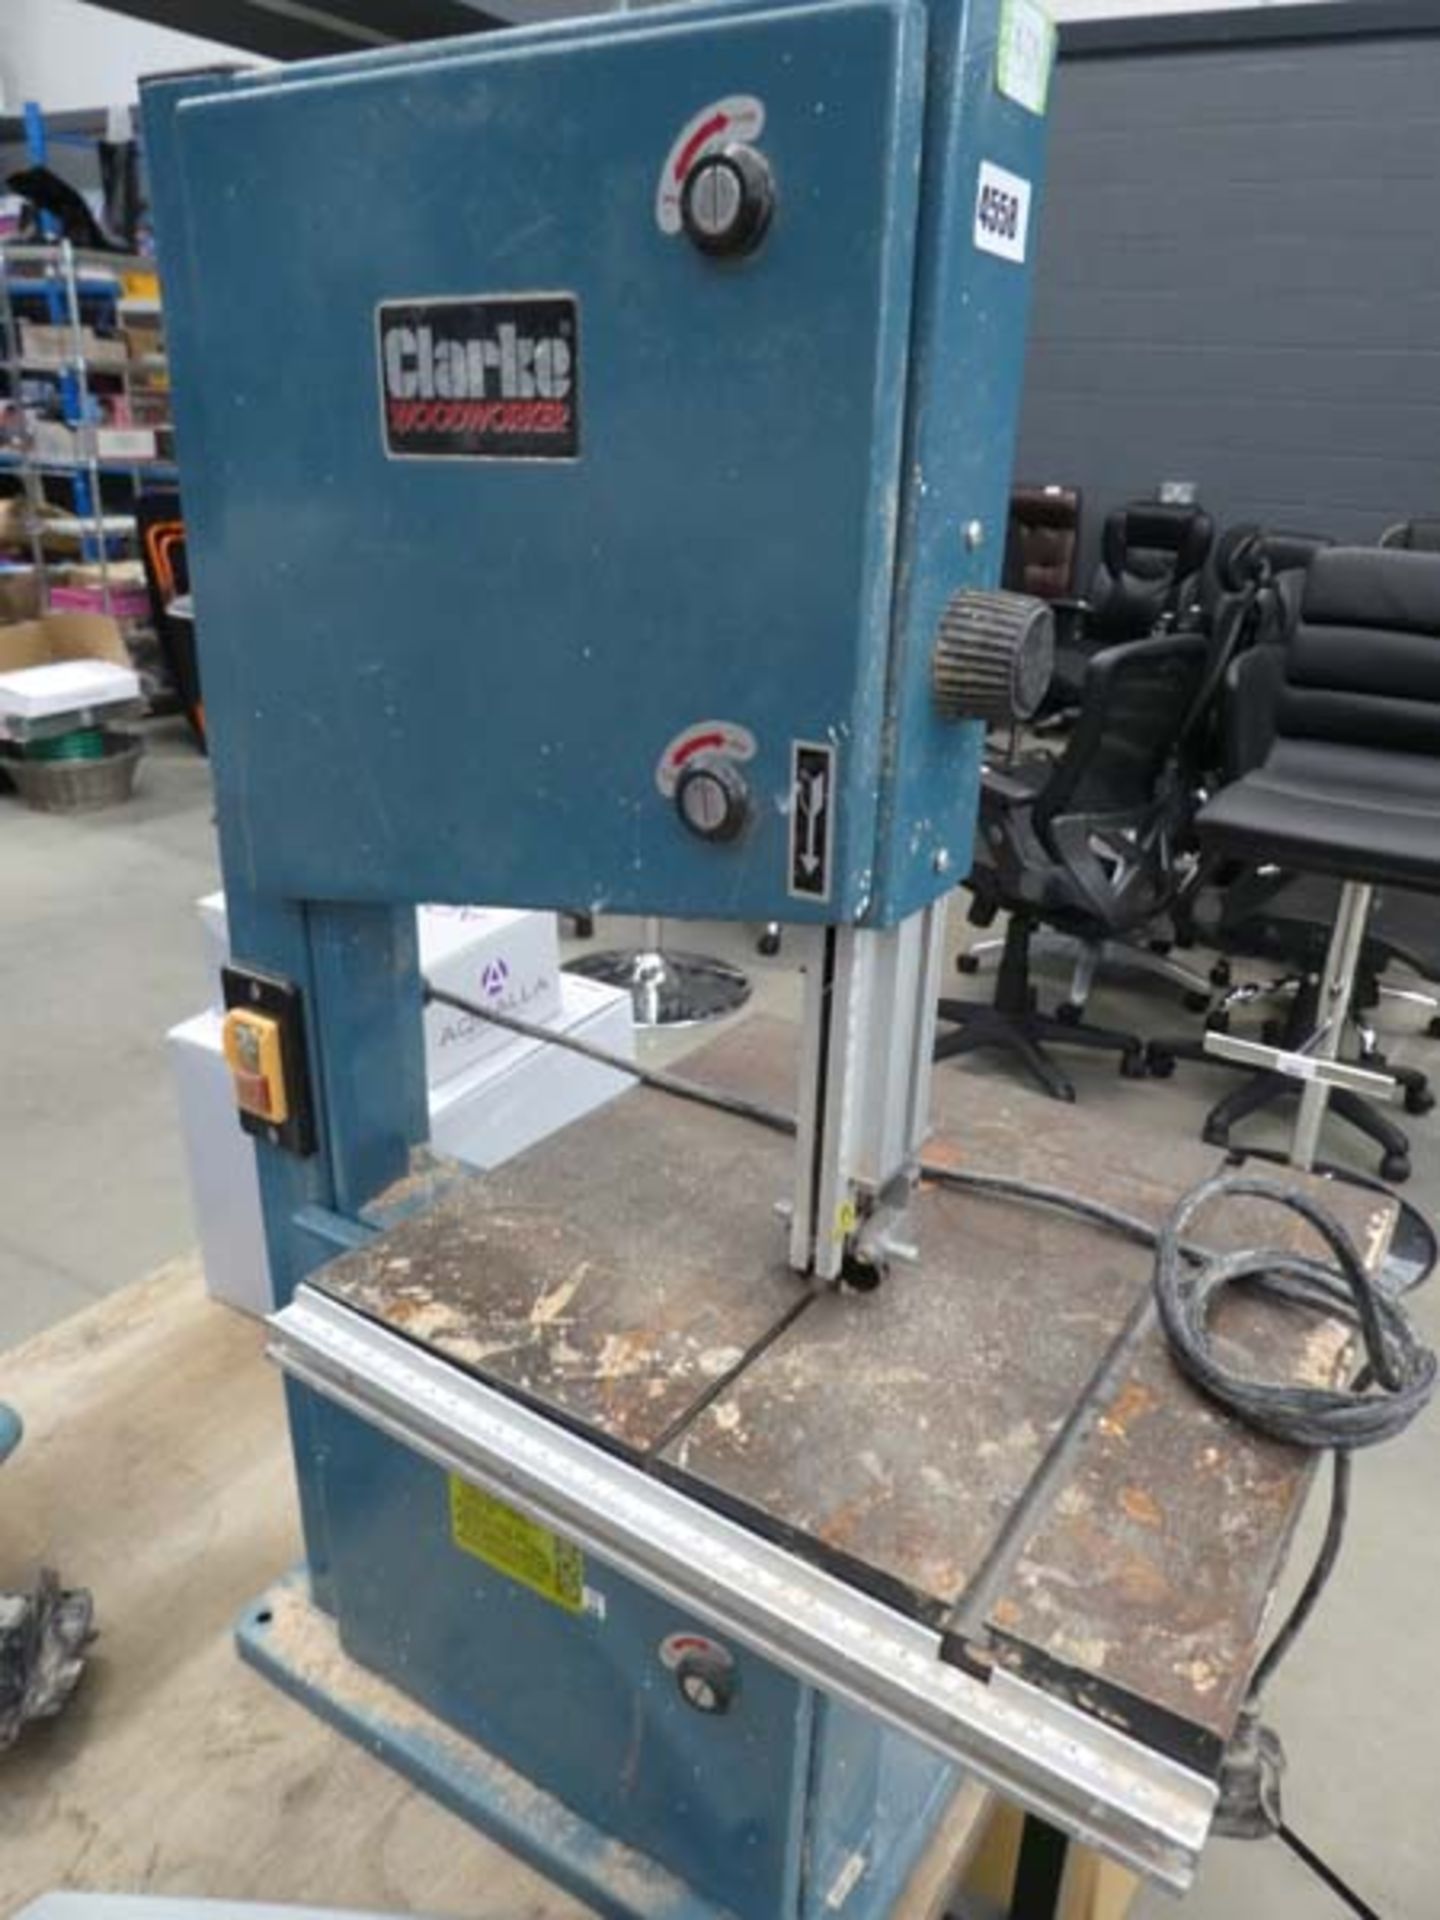 Clark bench top band saw - Image 3 of 3